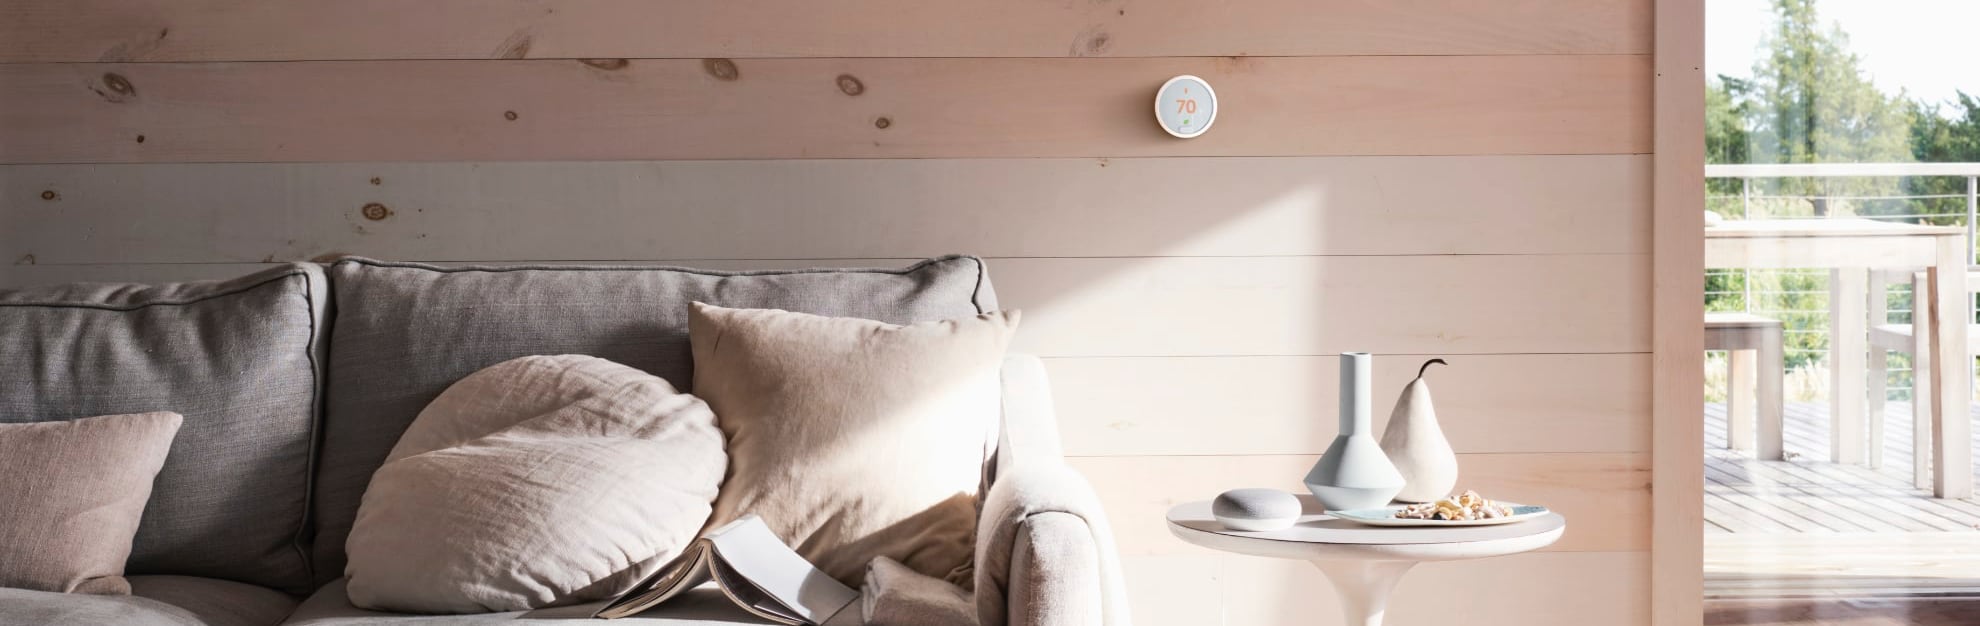 Vivint Home Automation in Monroe